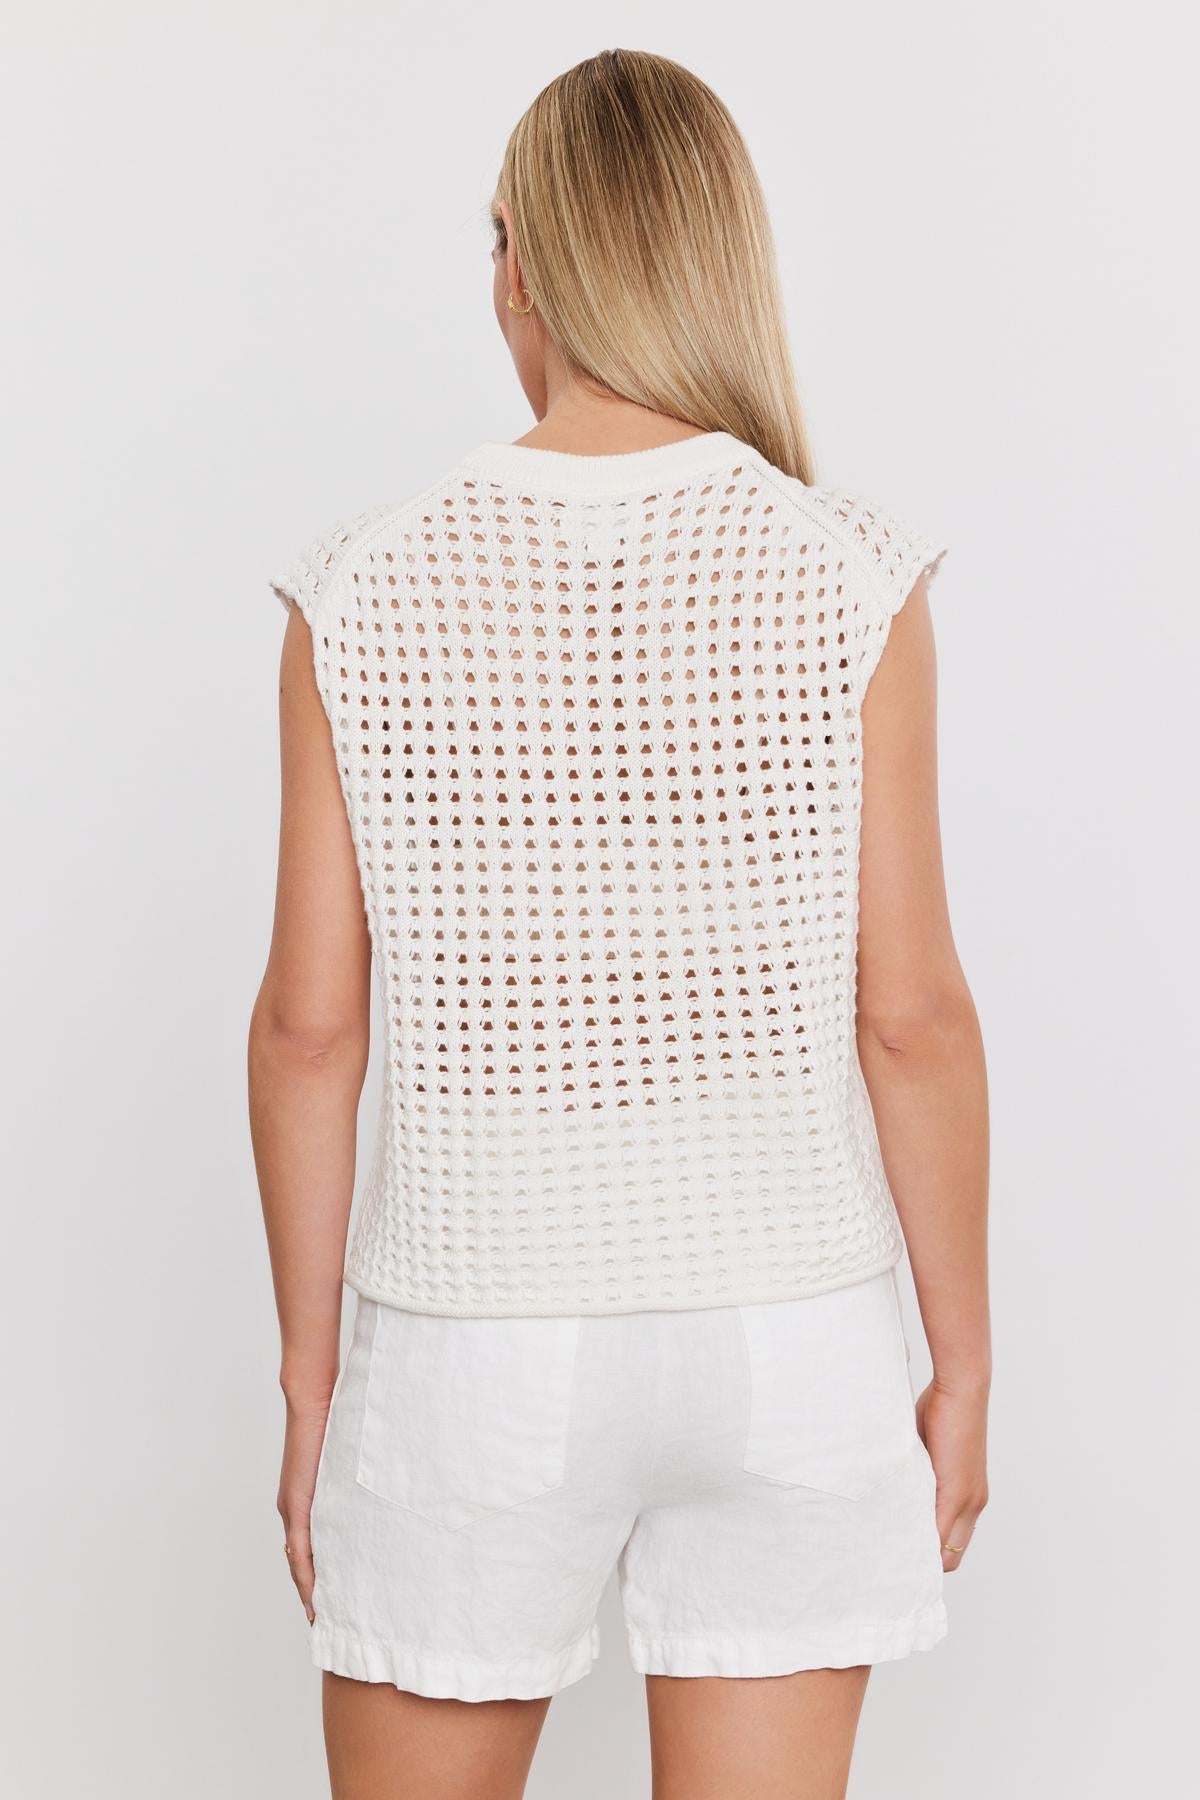 Person with long blond hair, wearing a white, sleeveless, crocheted top and white shorts, standing with their back facing the camera against a plain white background, presenting a cropped silhouette ideal for showcasing Velvet by Graham & Spencer's MAISON SWEATER in lightweight cotton cashmere.-37162037739713